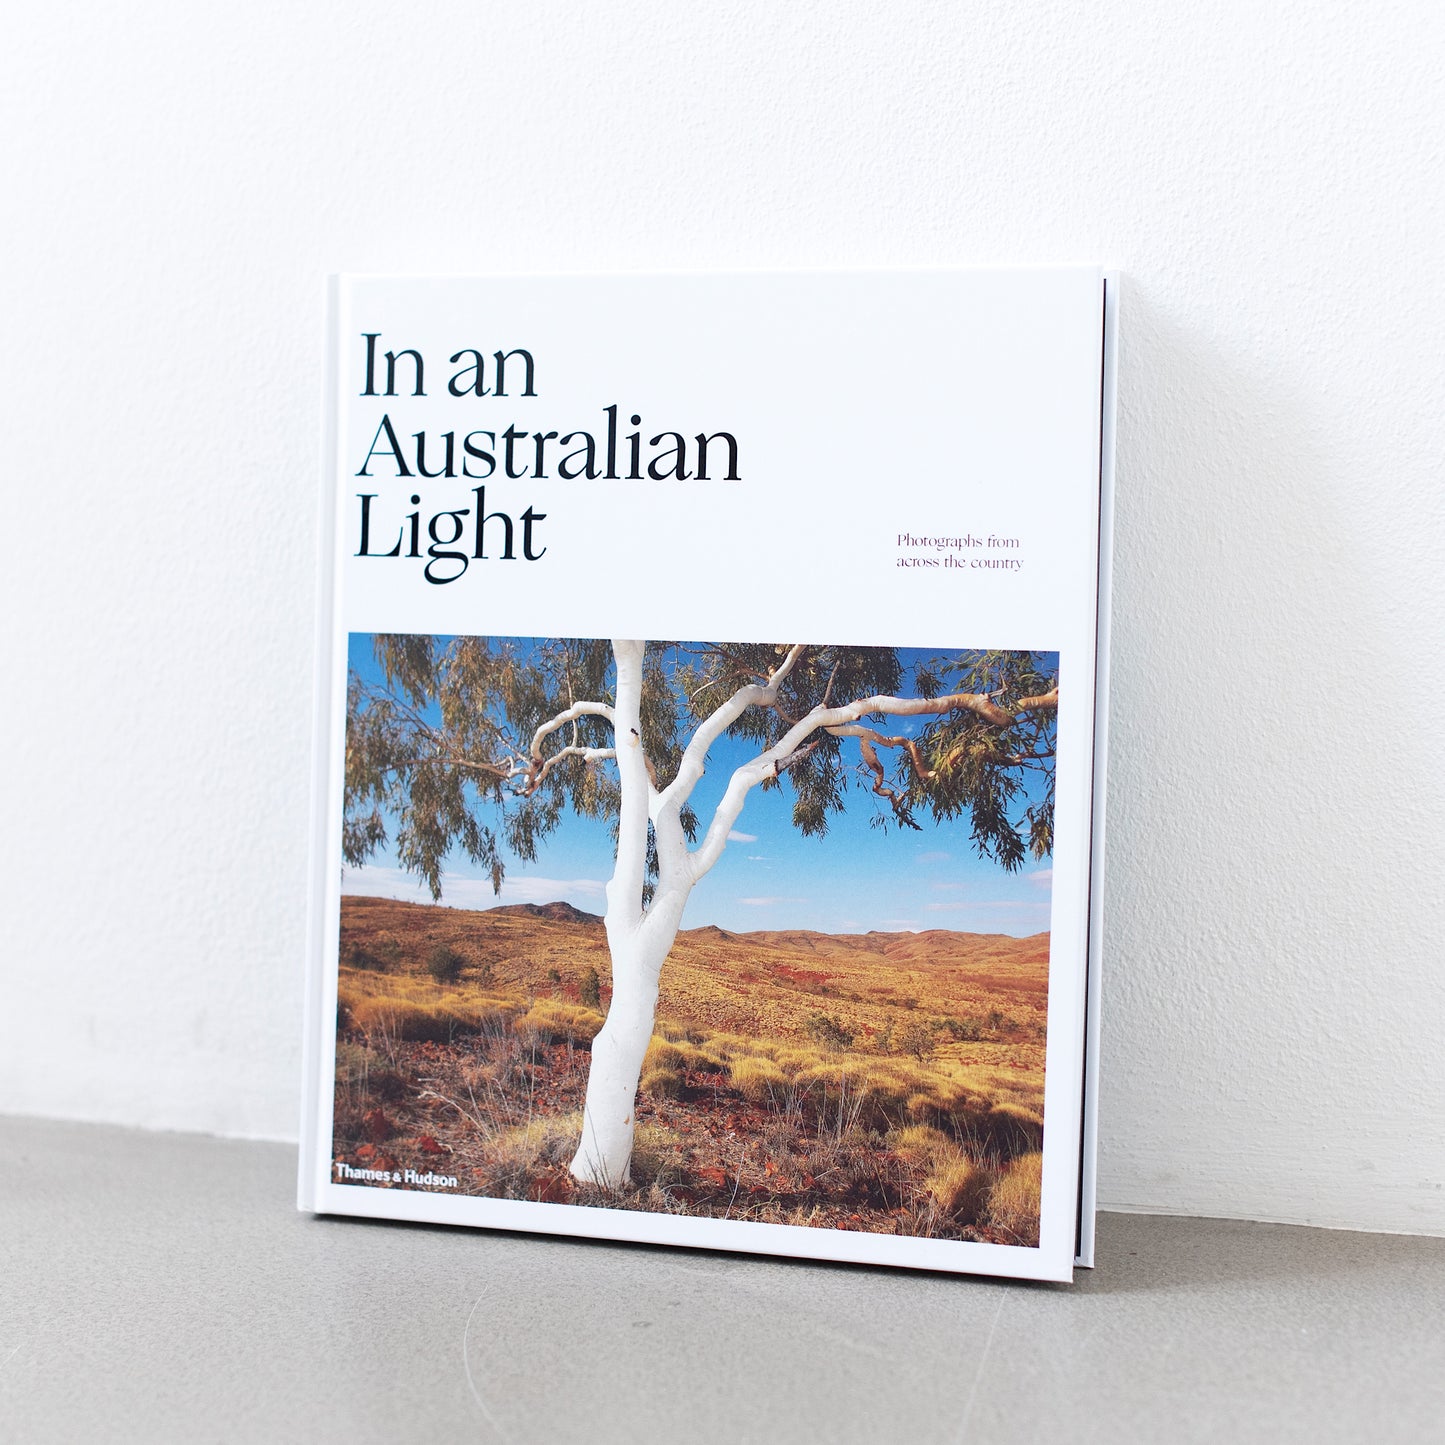 In an Australian Light: Photographs from Across the Country